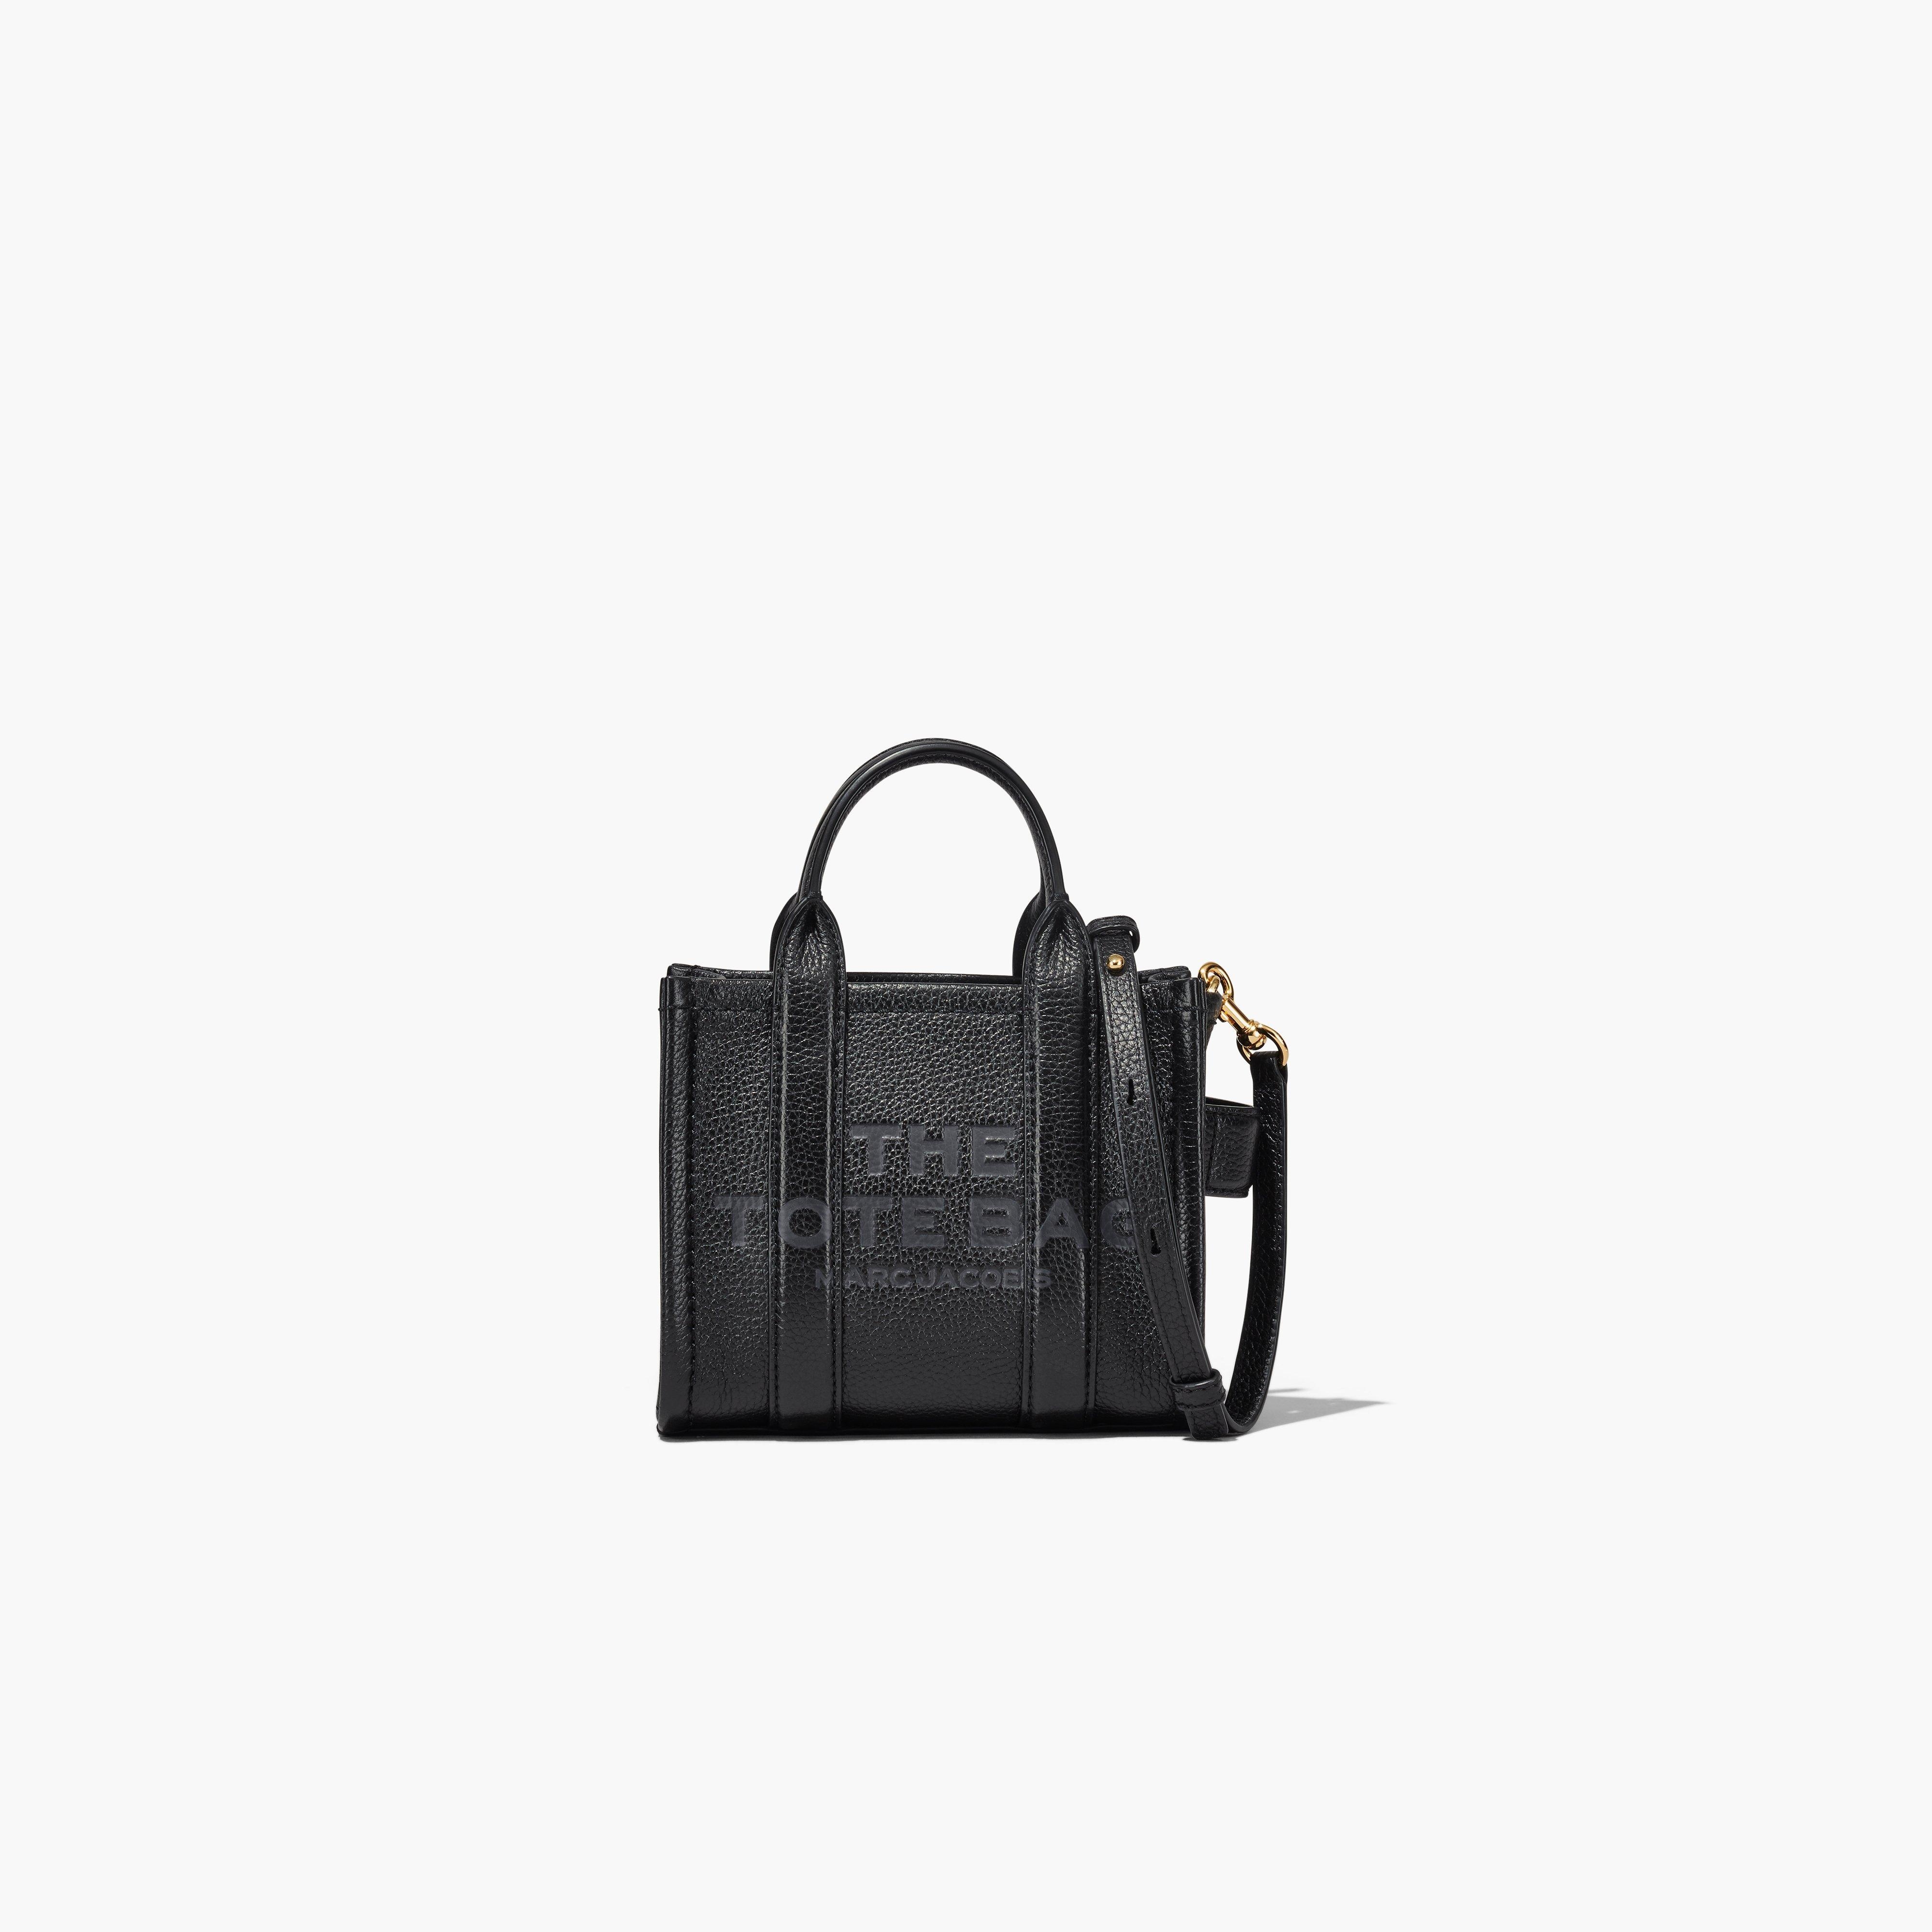 THE LEATHER MICRO TOTE BAG - 1